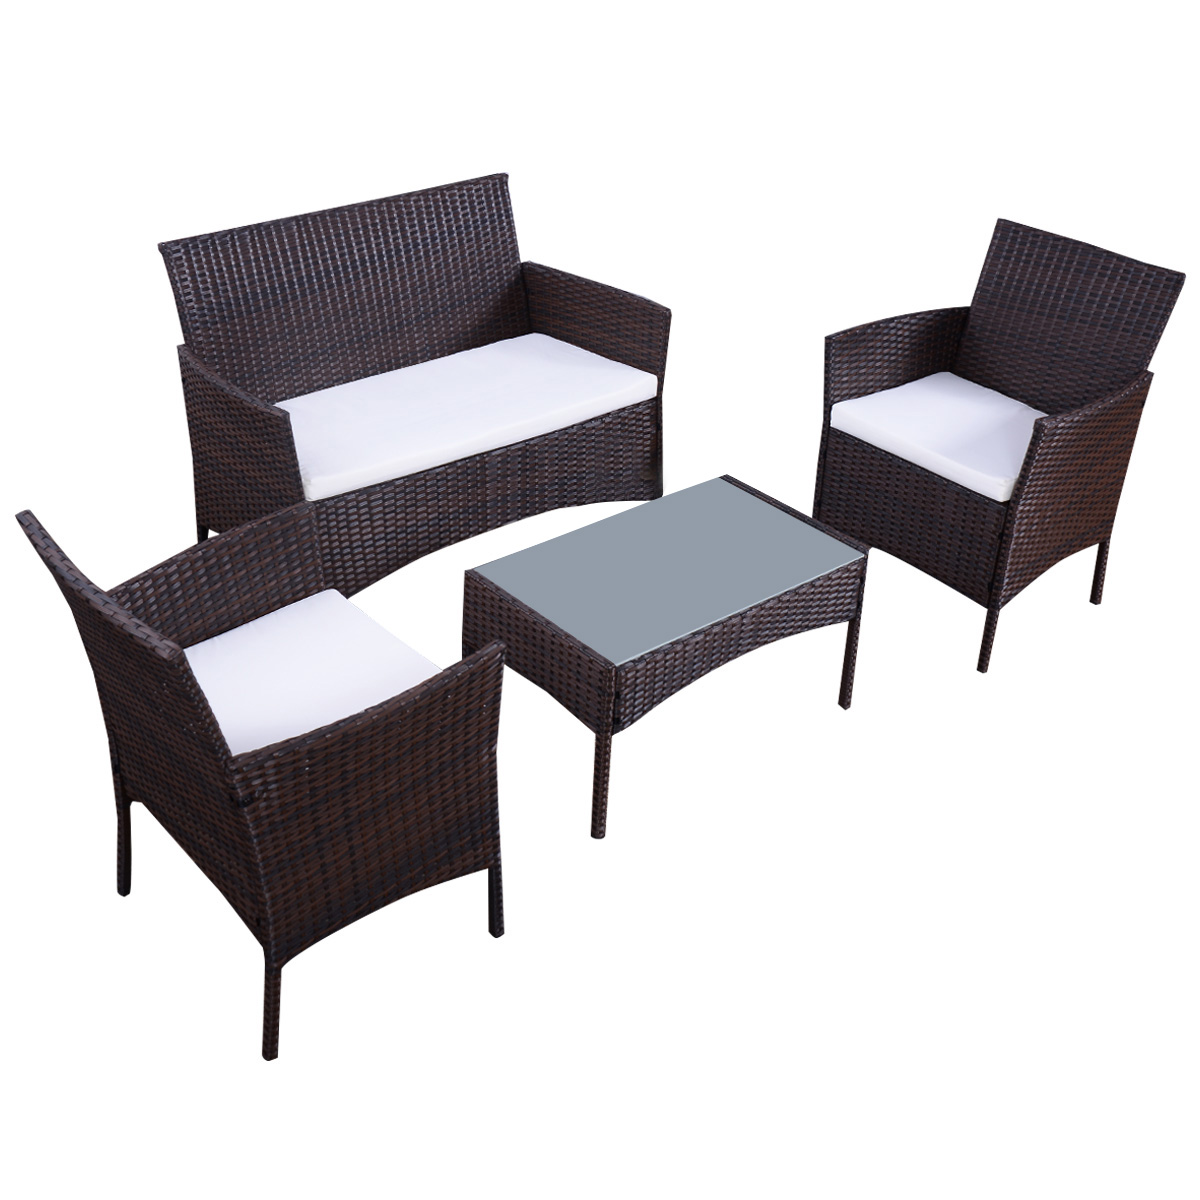 Costway 4 PC Patio Rattan Wicker Chair Sofa Table Set Outdoor Garden Furniture Cushioned - image 2 of 4